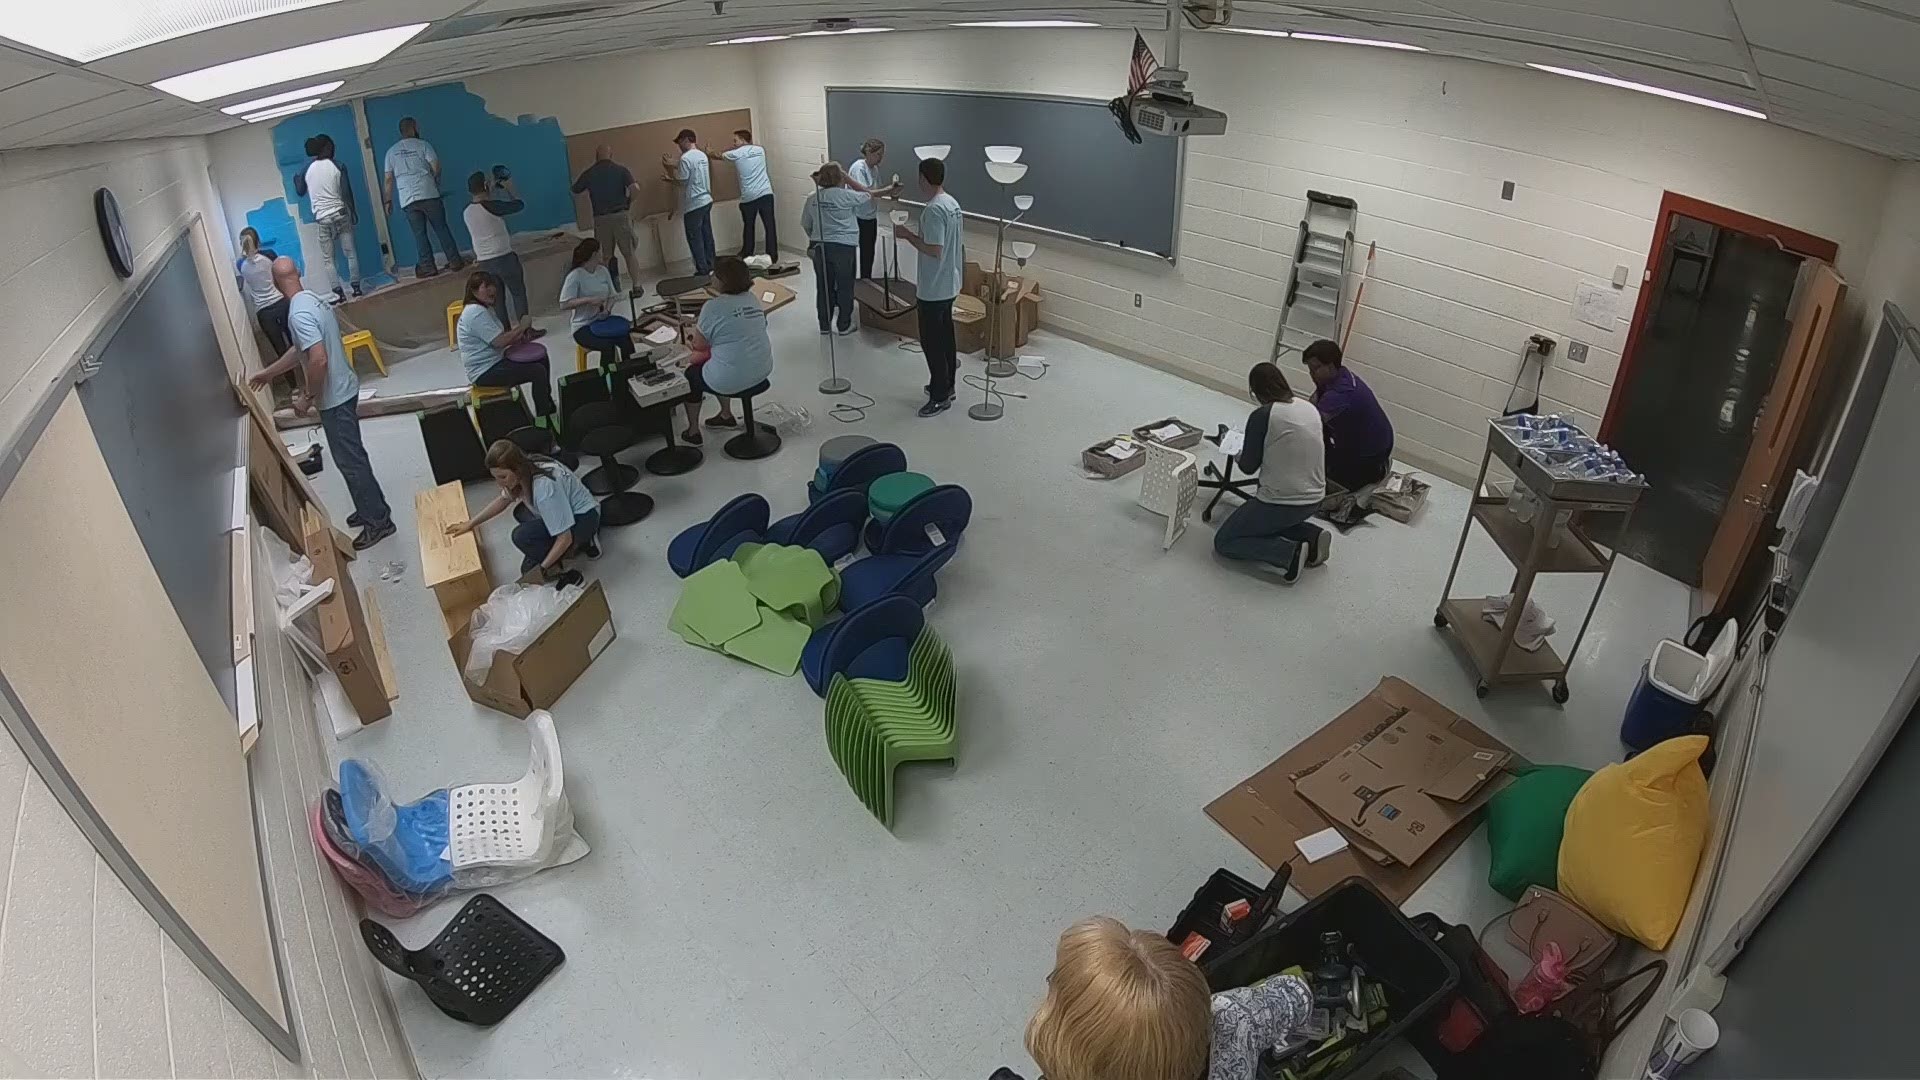 Watch the classroom transform in 27 seconds